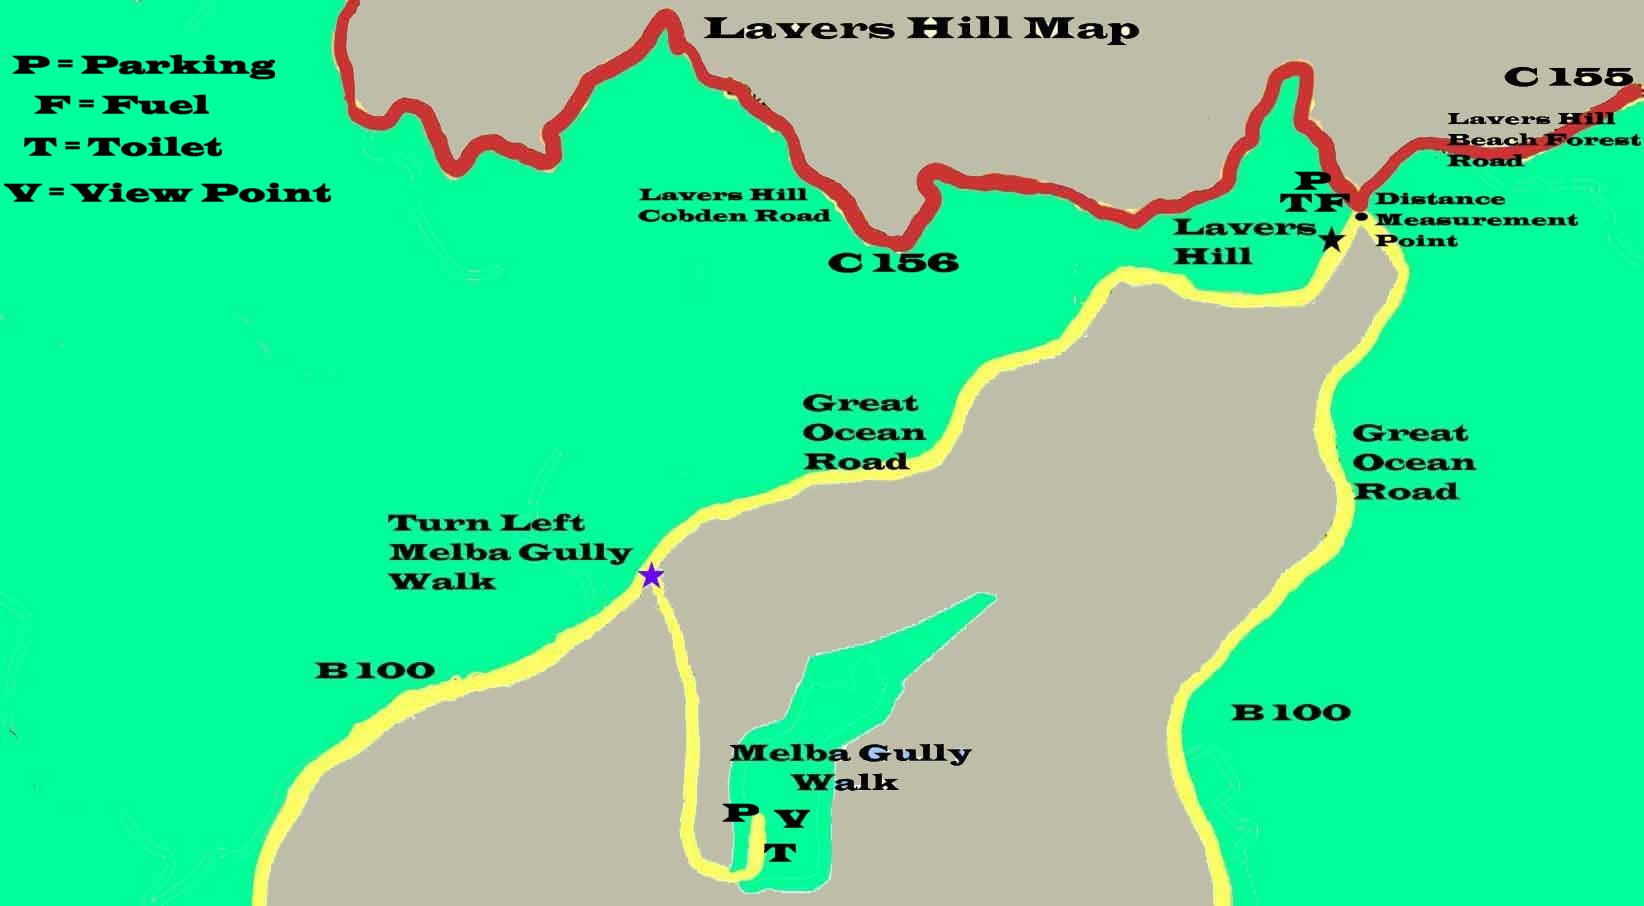 Great Ocean Road map of Lavers Hill